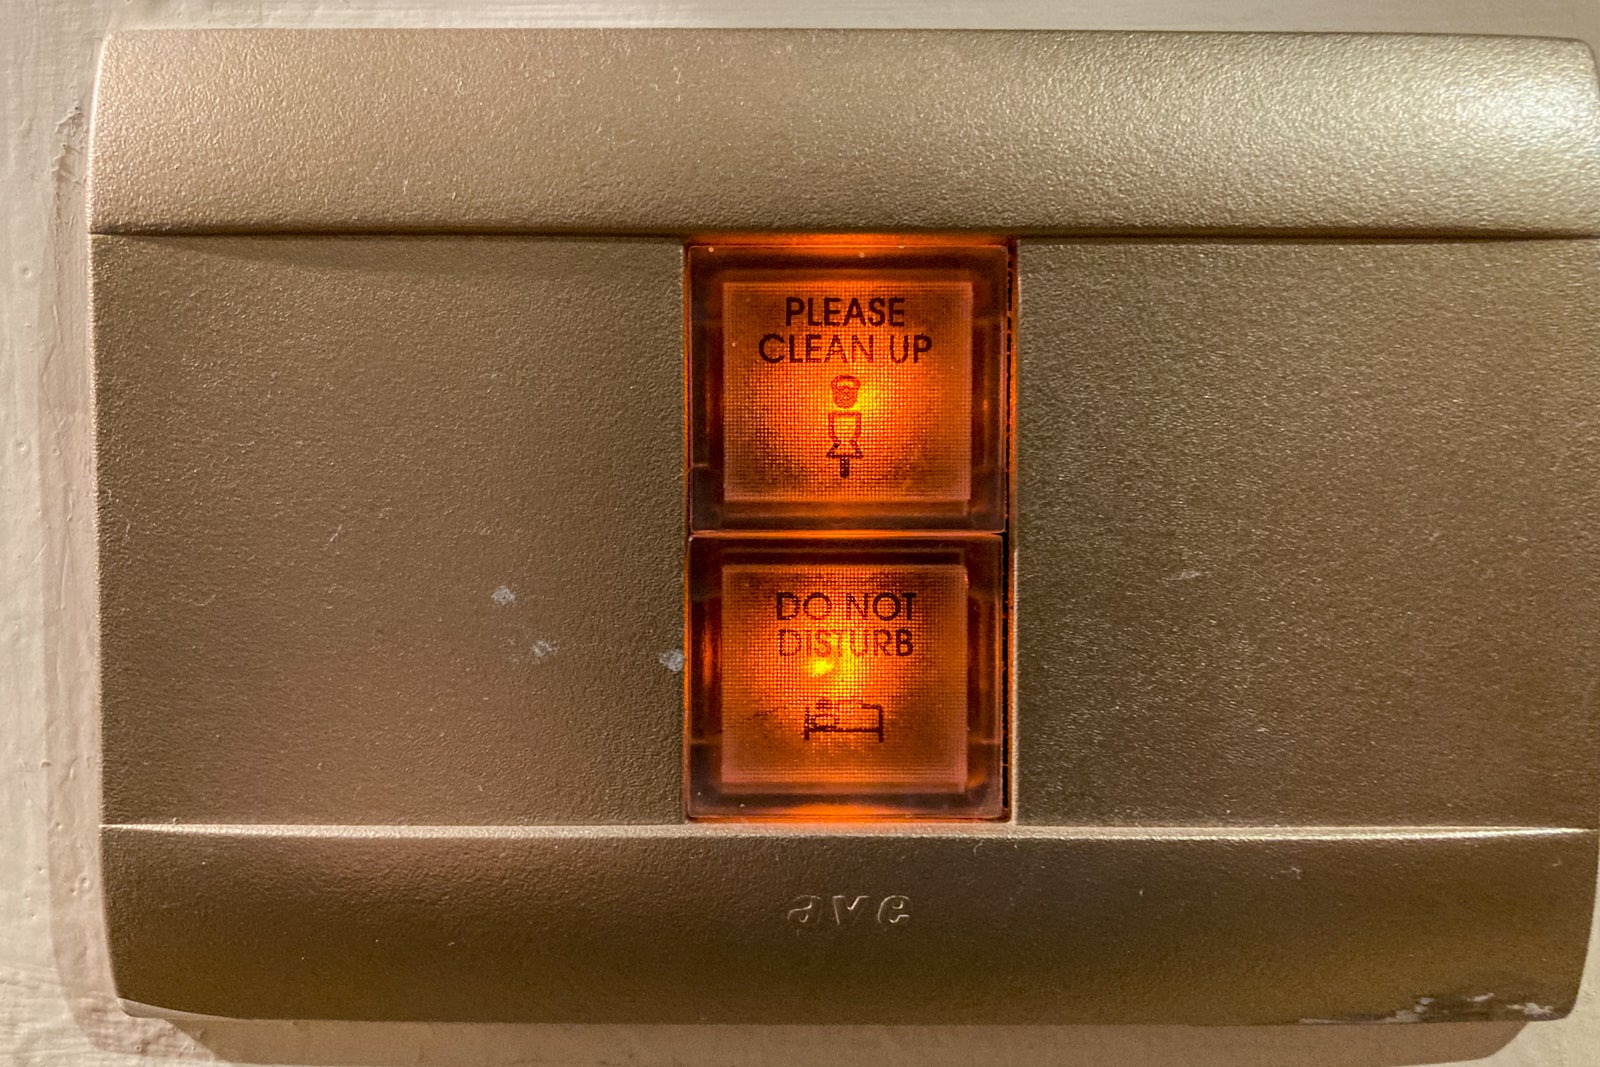 light-up indicators for wanting room service and for "do not disturb"